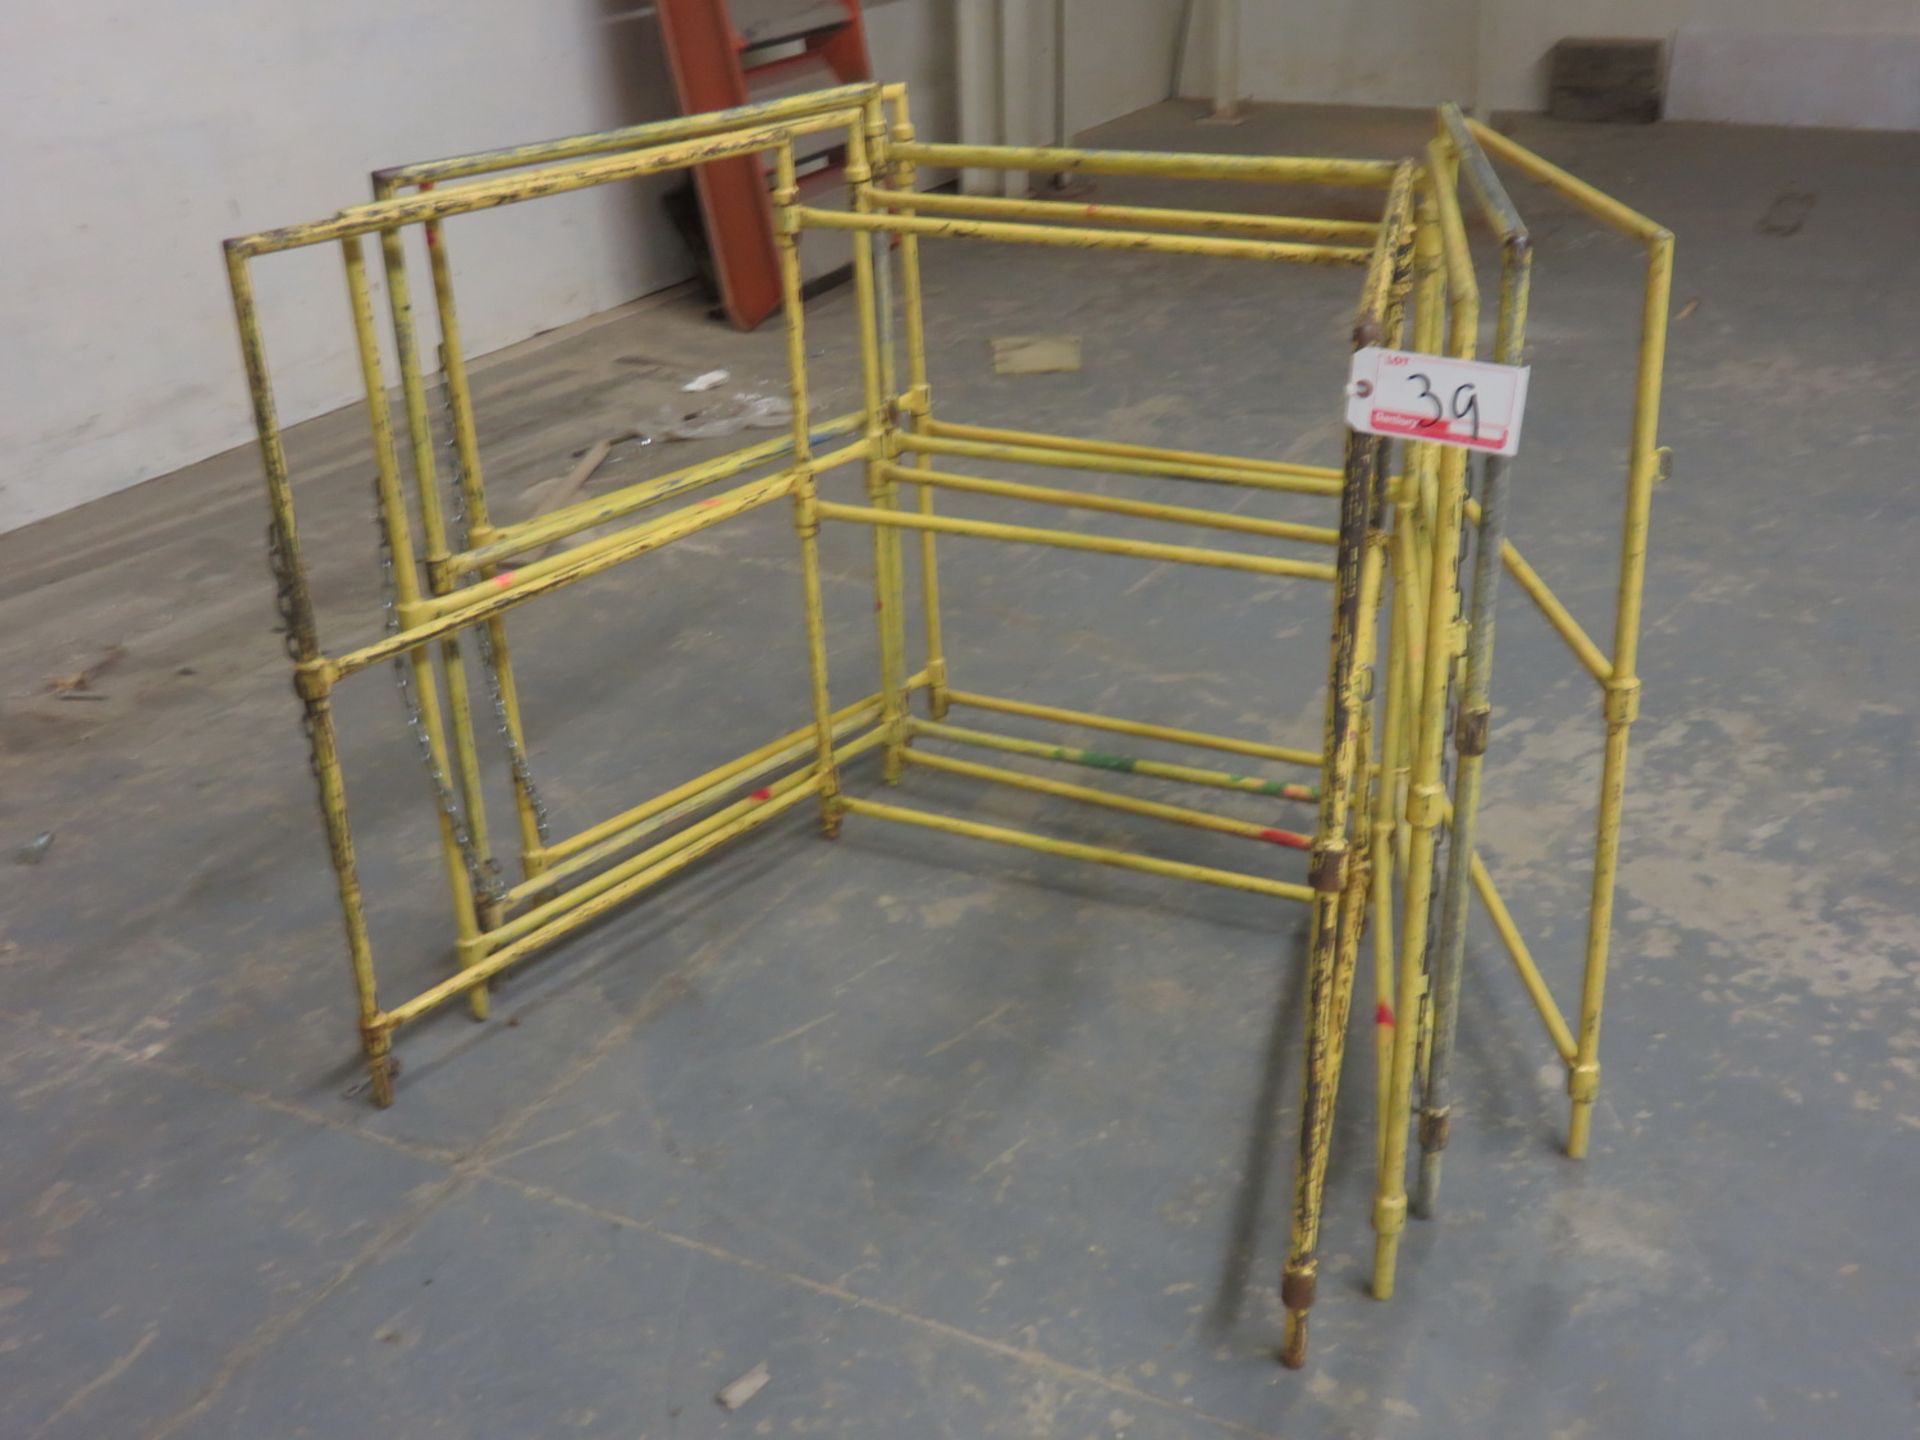 UNITS - YELLOW STEEL 3-SIDED MANHOLE SAFETY GUARDS